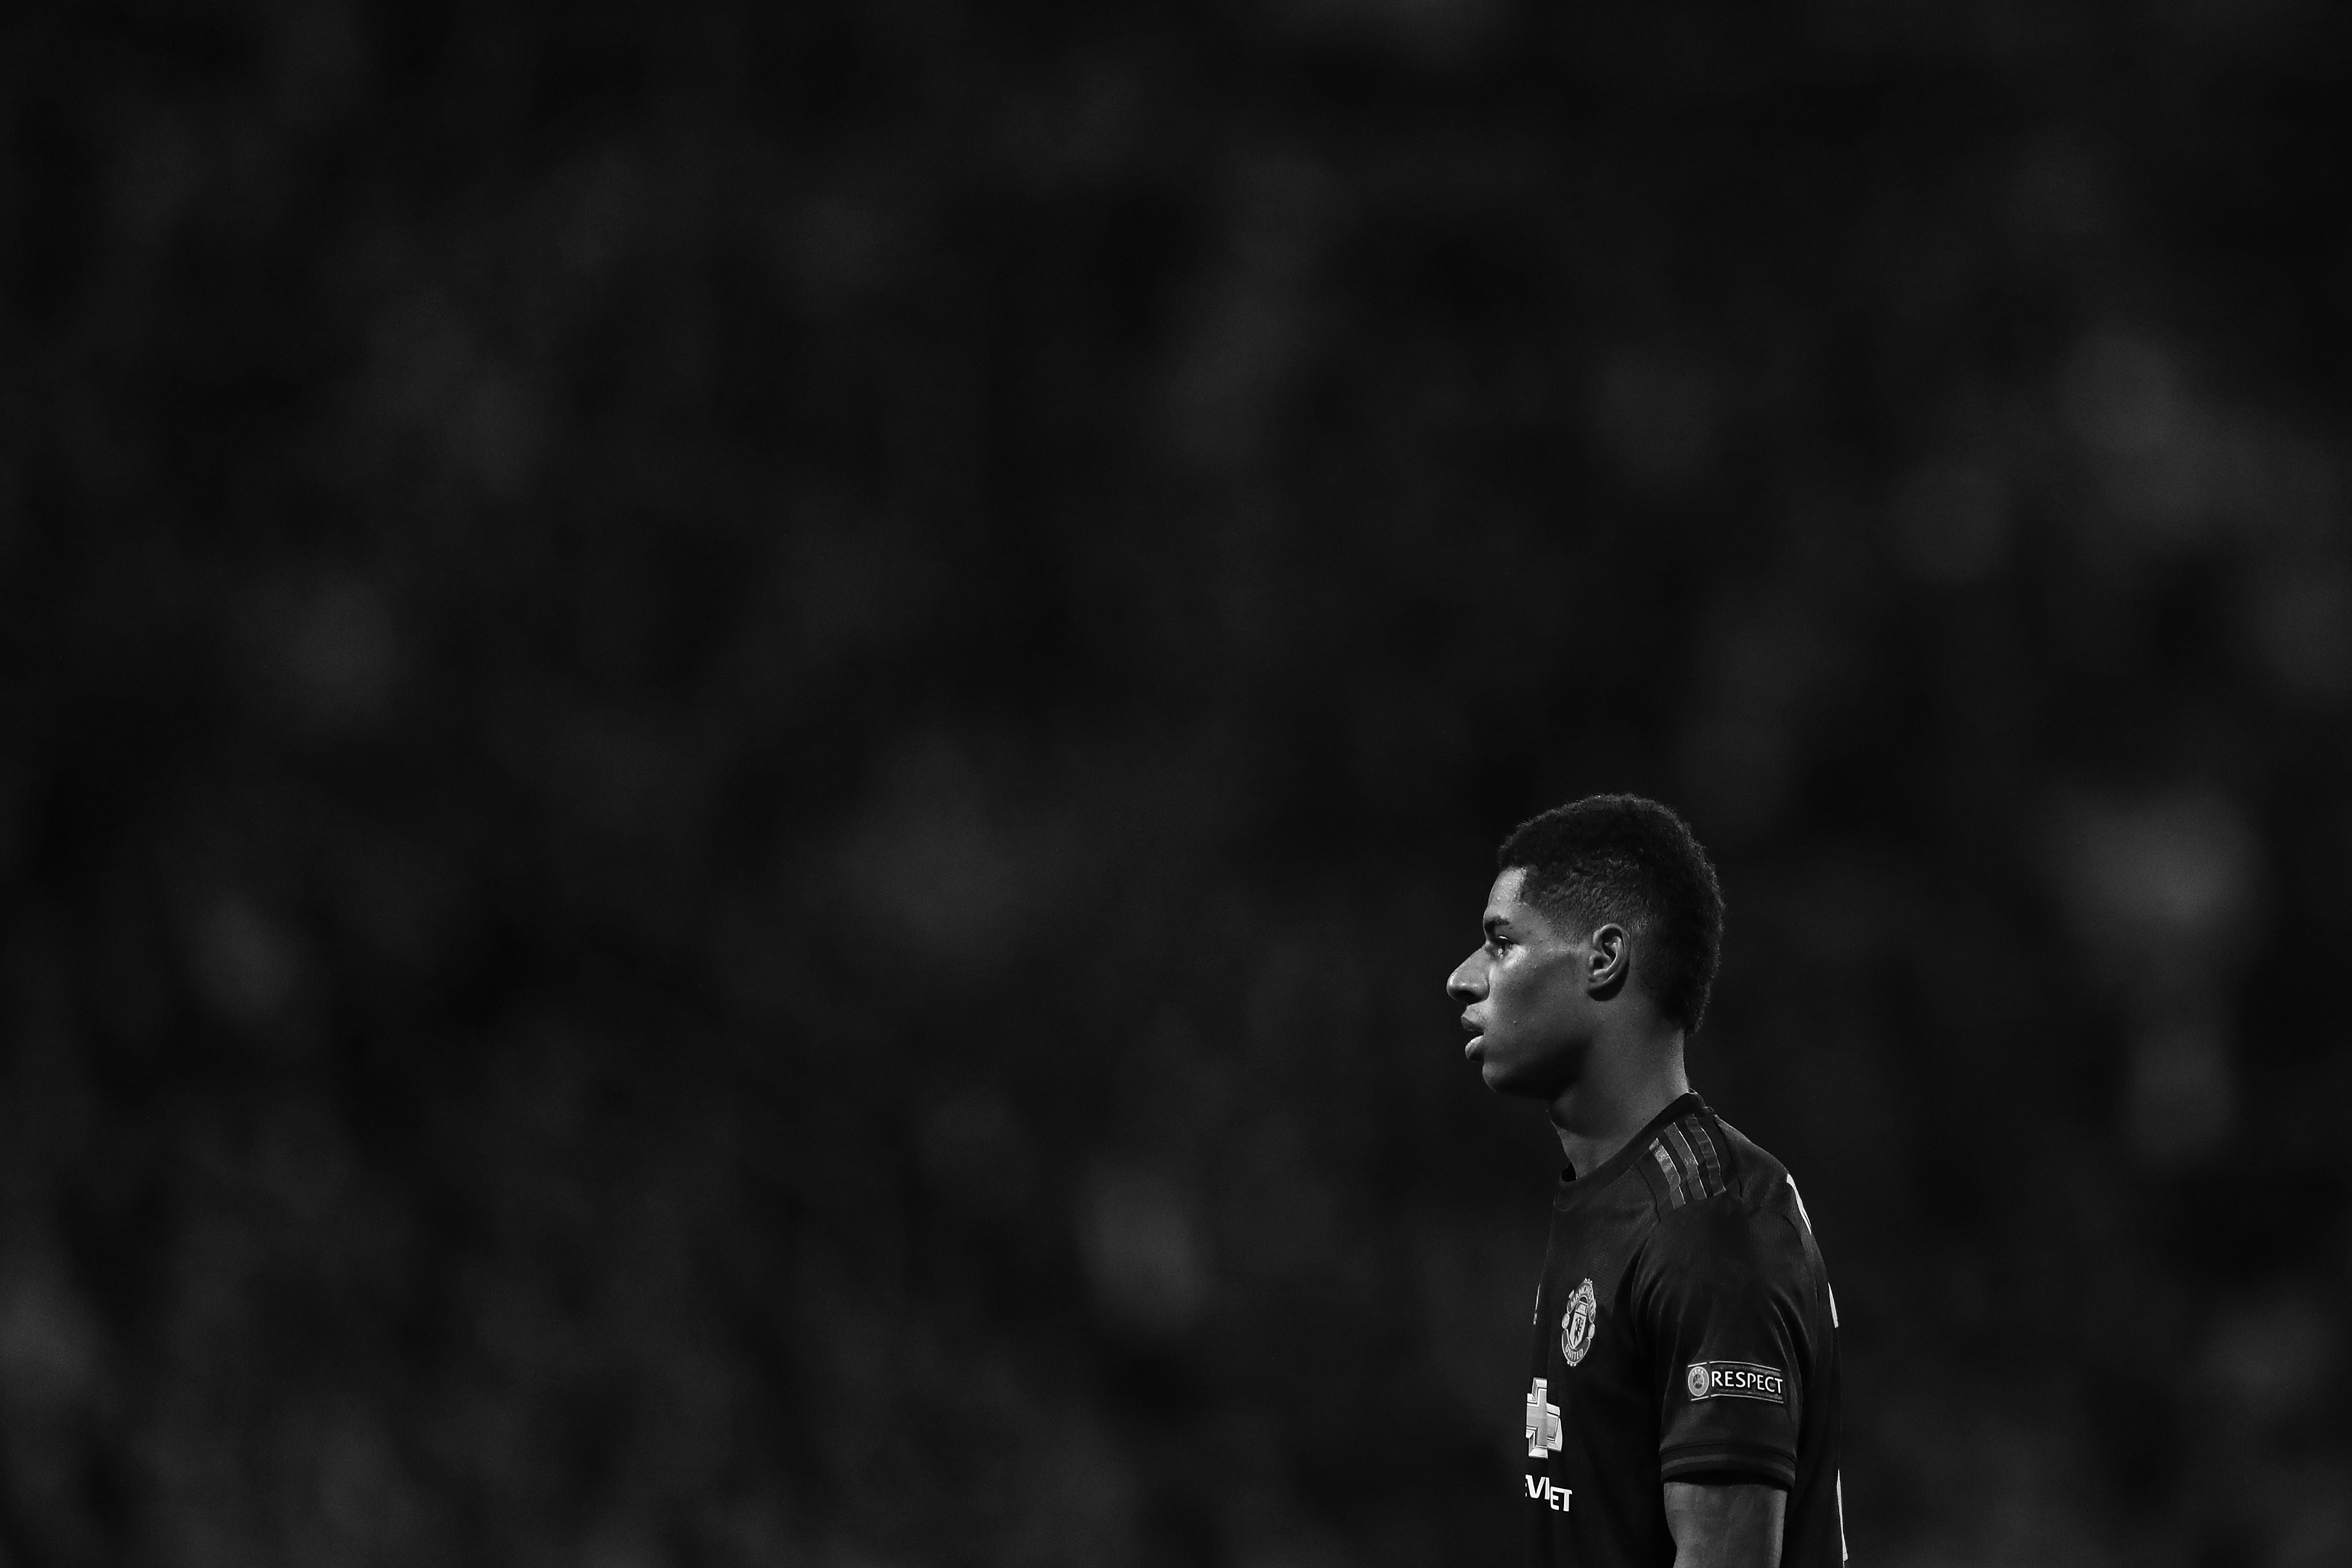 ALKMAAR, NETHERLANDS - OCTOBER 03: (EDITORS NOTE - This image has been converted to black and white(EDITORS NOTE: Image has been converted to black and white.) Marcus Rashford of Manchester United looks on during the UEFA Europa League group L match between AZ Alkmaar and Manchester United at AFAS-Stadium on October 03, 2019 in Alkmaar, Netherlands. (Photo by Naomi Baker/Getty Images)